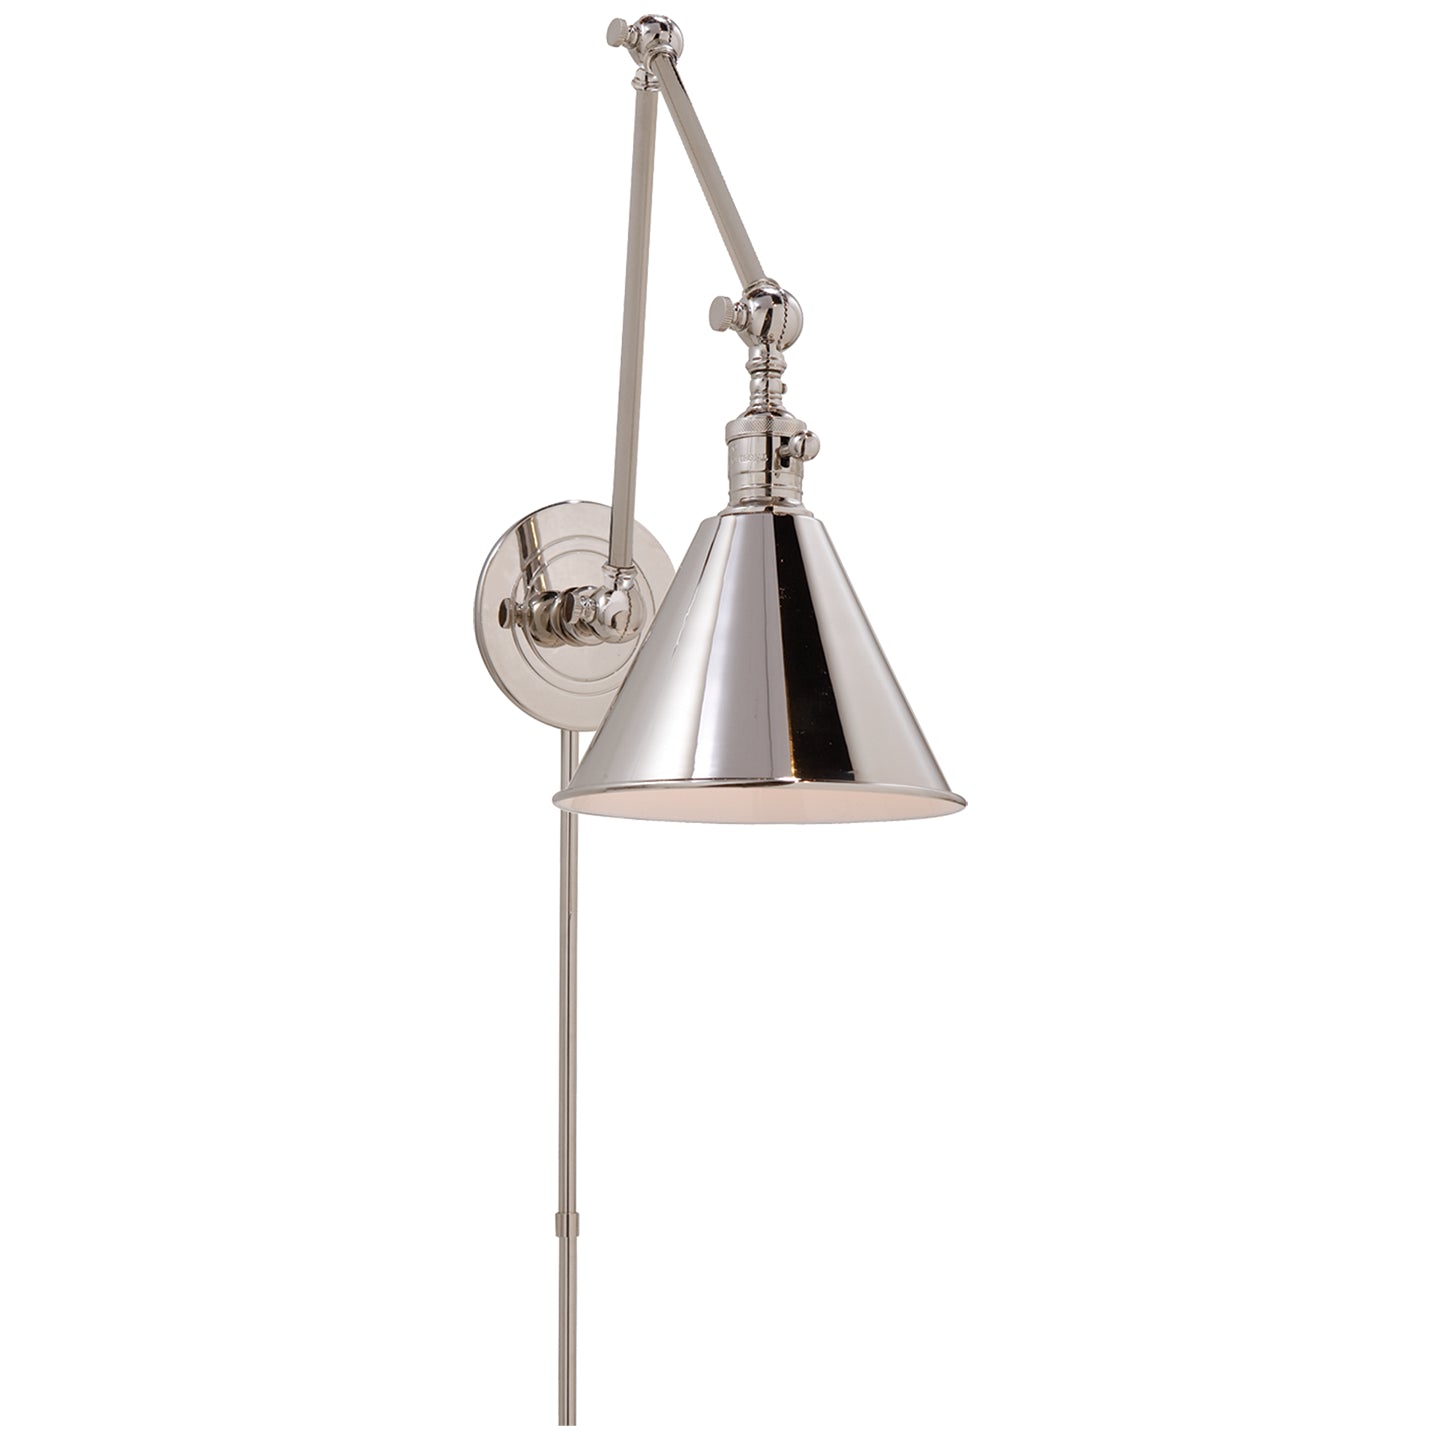 Visual Comfort Signature - SL 2923PN - One Light Wall Sconce - Boston Functional - Polished Nickel